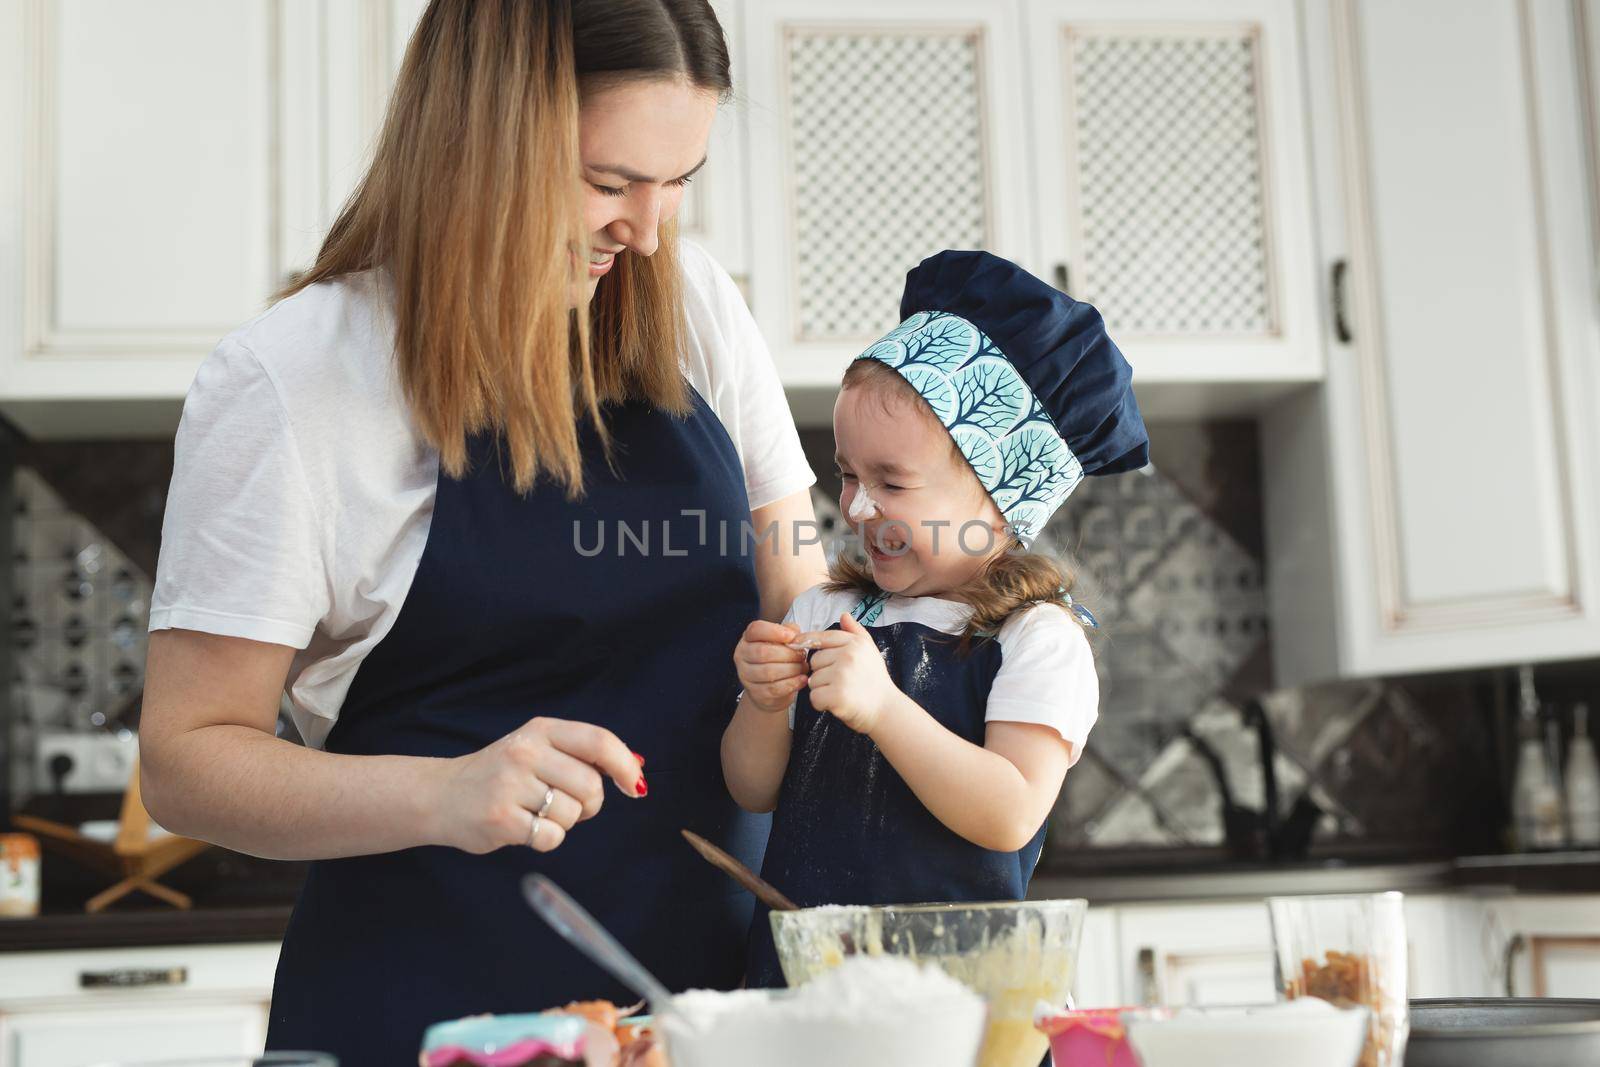 Cute little girl and her beautiful mom in matching aprons and caps play and laugh while kneading dough in the kitchen by StudioPeace